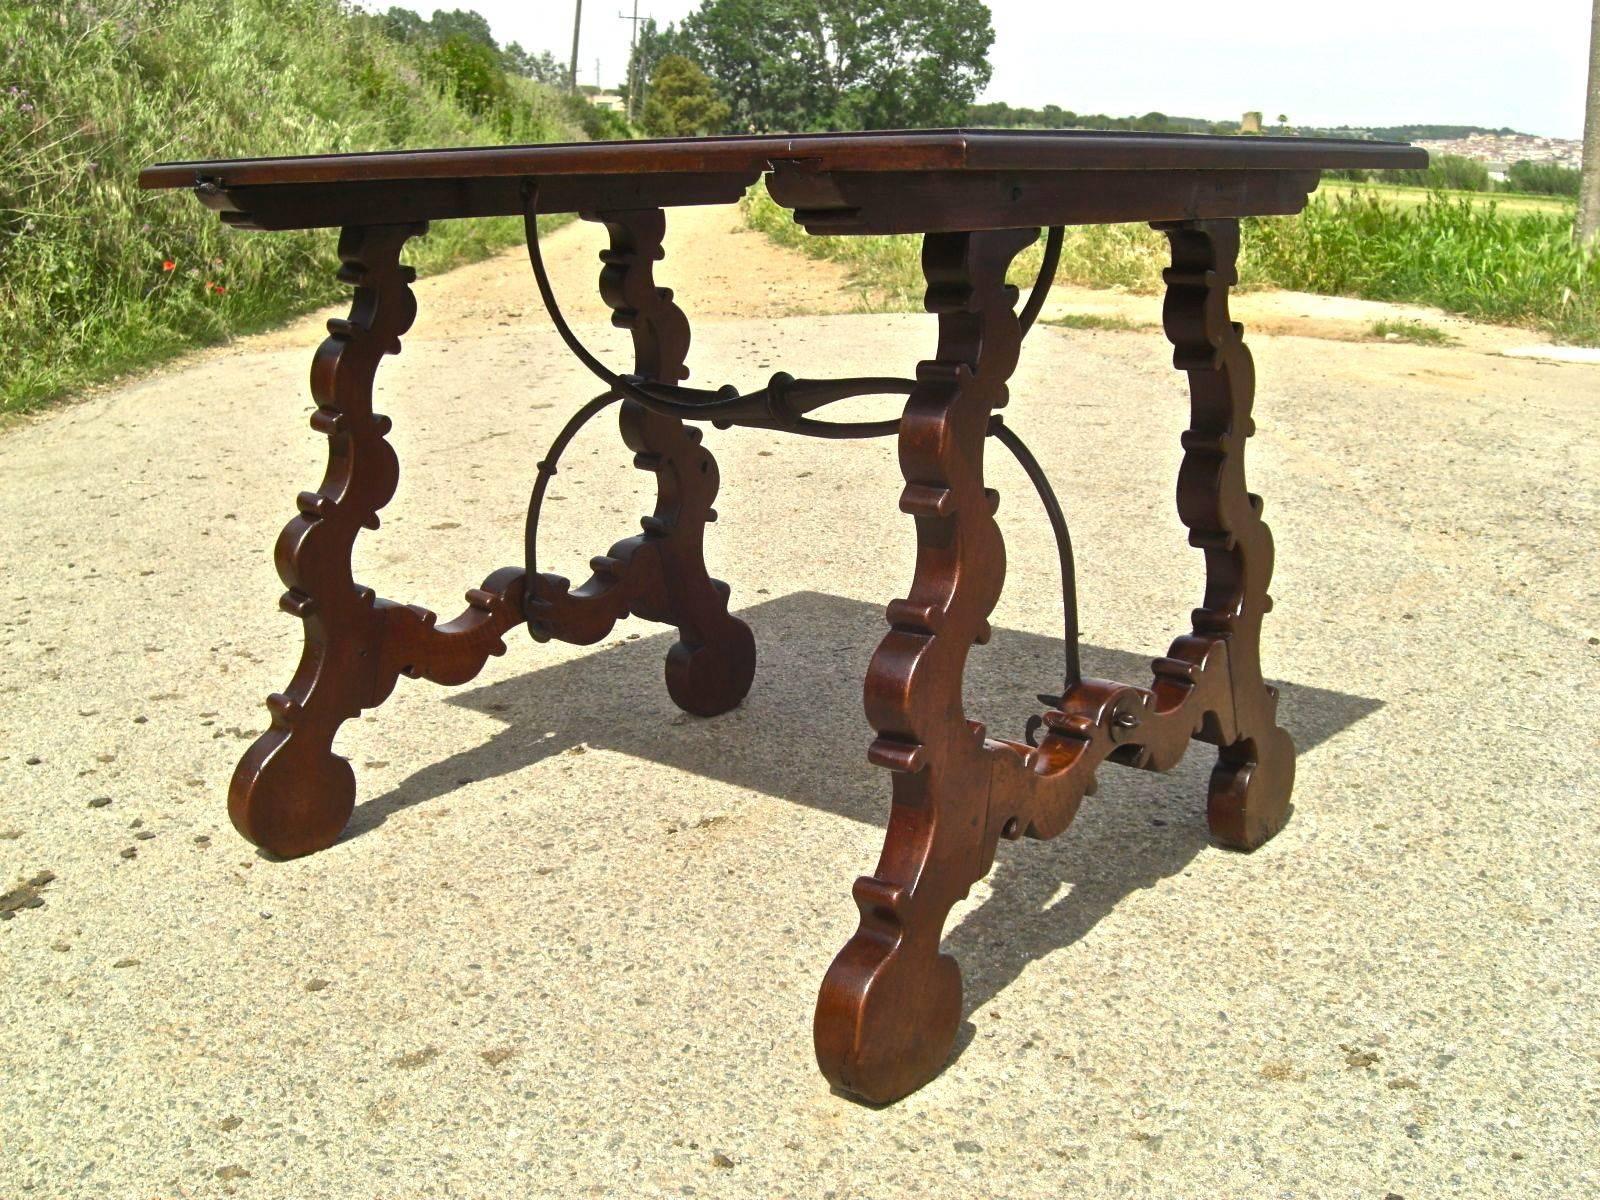 Renaissance Revival Early 19th Century Scalloped Walnut Lyre Leg Table with Iron Stretchers